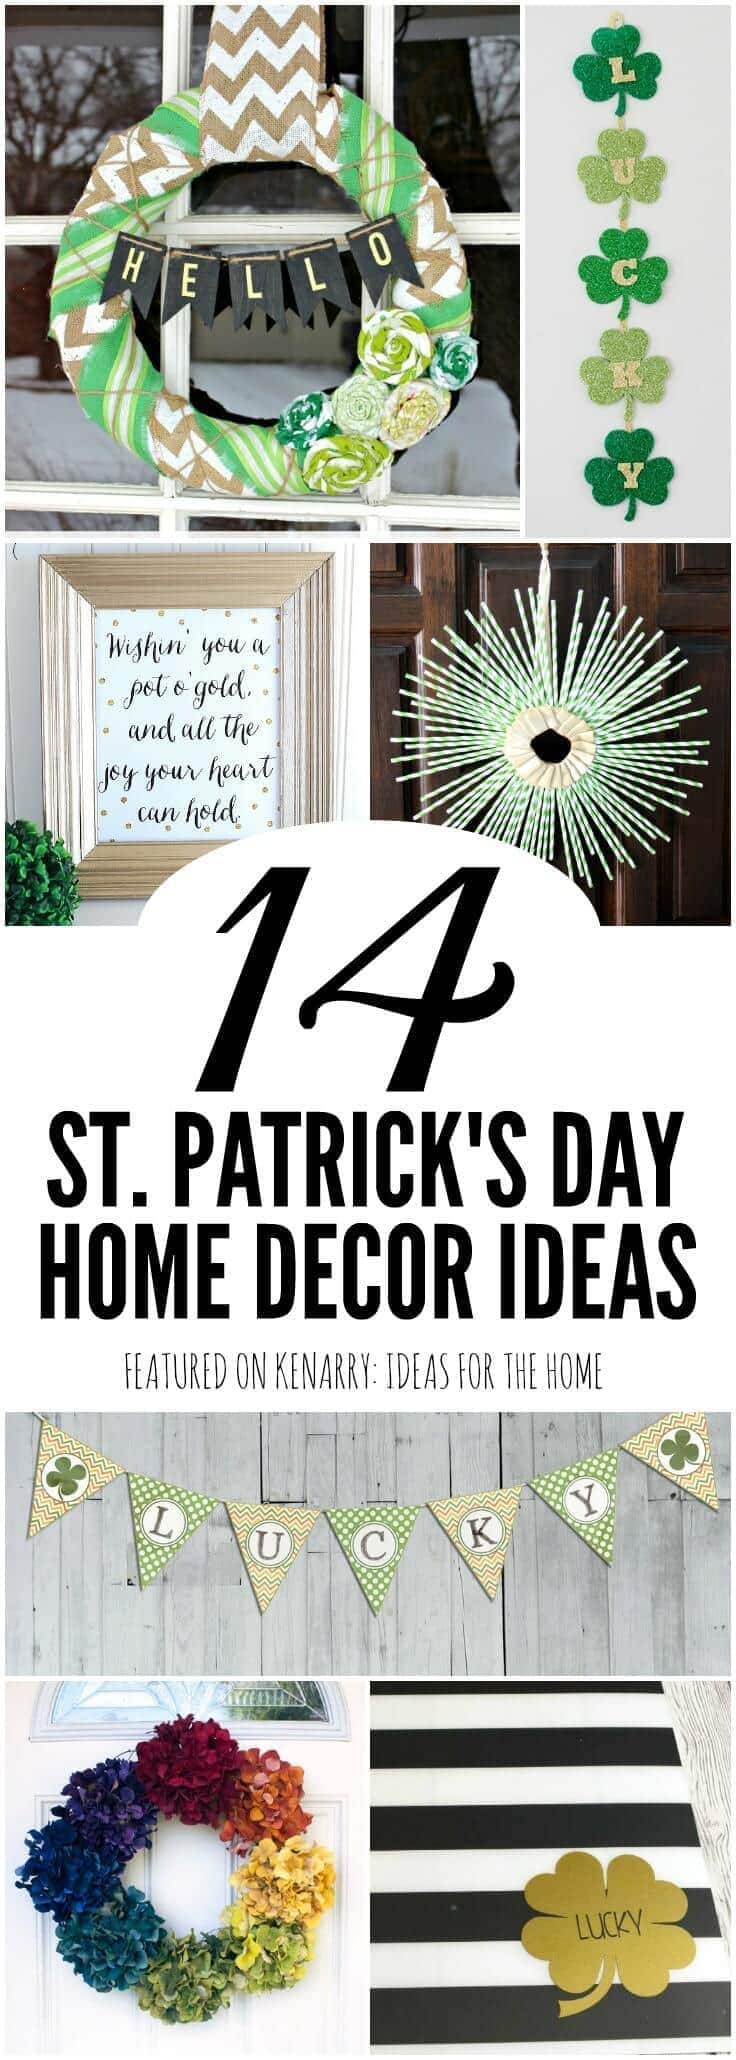 Love these easy ideas for crafts and free printables you can use for St. Patrick's Day home decor including wreaths, placemats, banners and more adorned with shamrocks and green decorations.